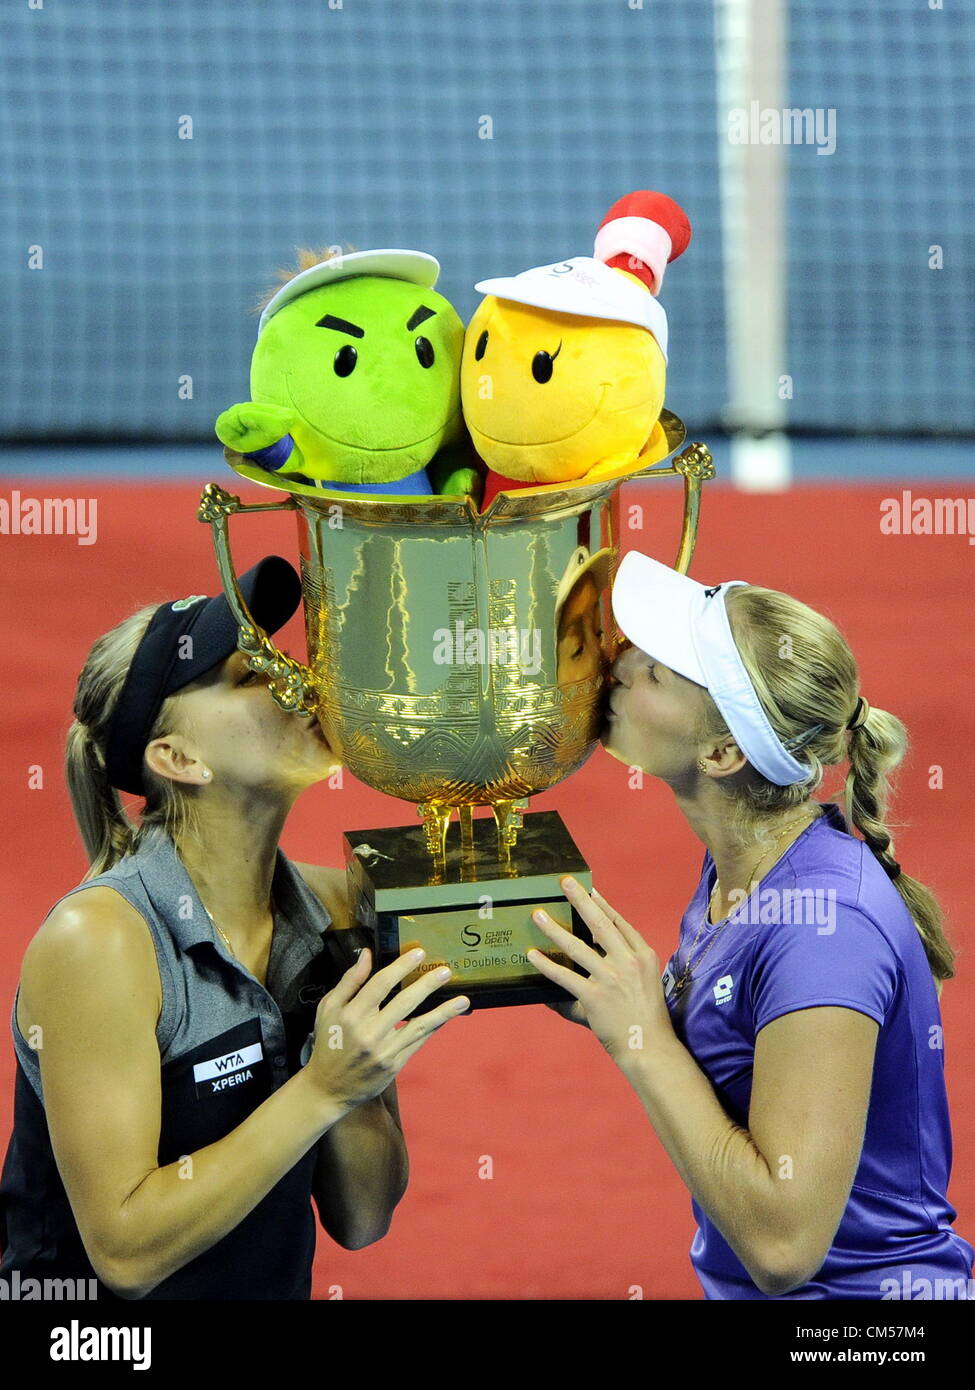 06.10.2012.  Beijing, CHINA; Elena Vesnina and Ekaterina Makarova of Russia defeat Nuria Llagostera Vives of Spain and Sania Mirza of India 2:0 during the Women's doubles final of the China Open at the China National Tennis Center. Stock Photo